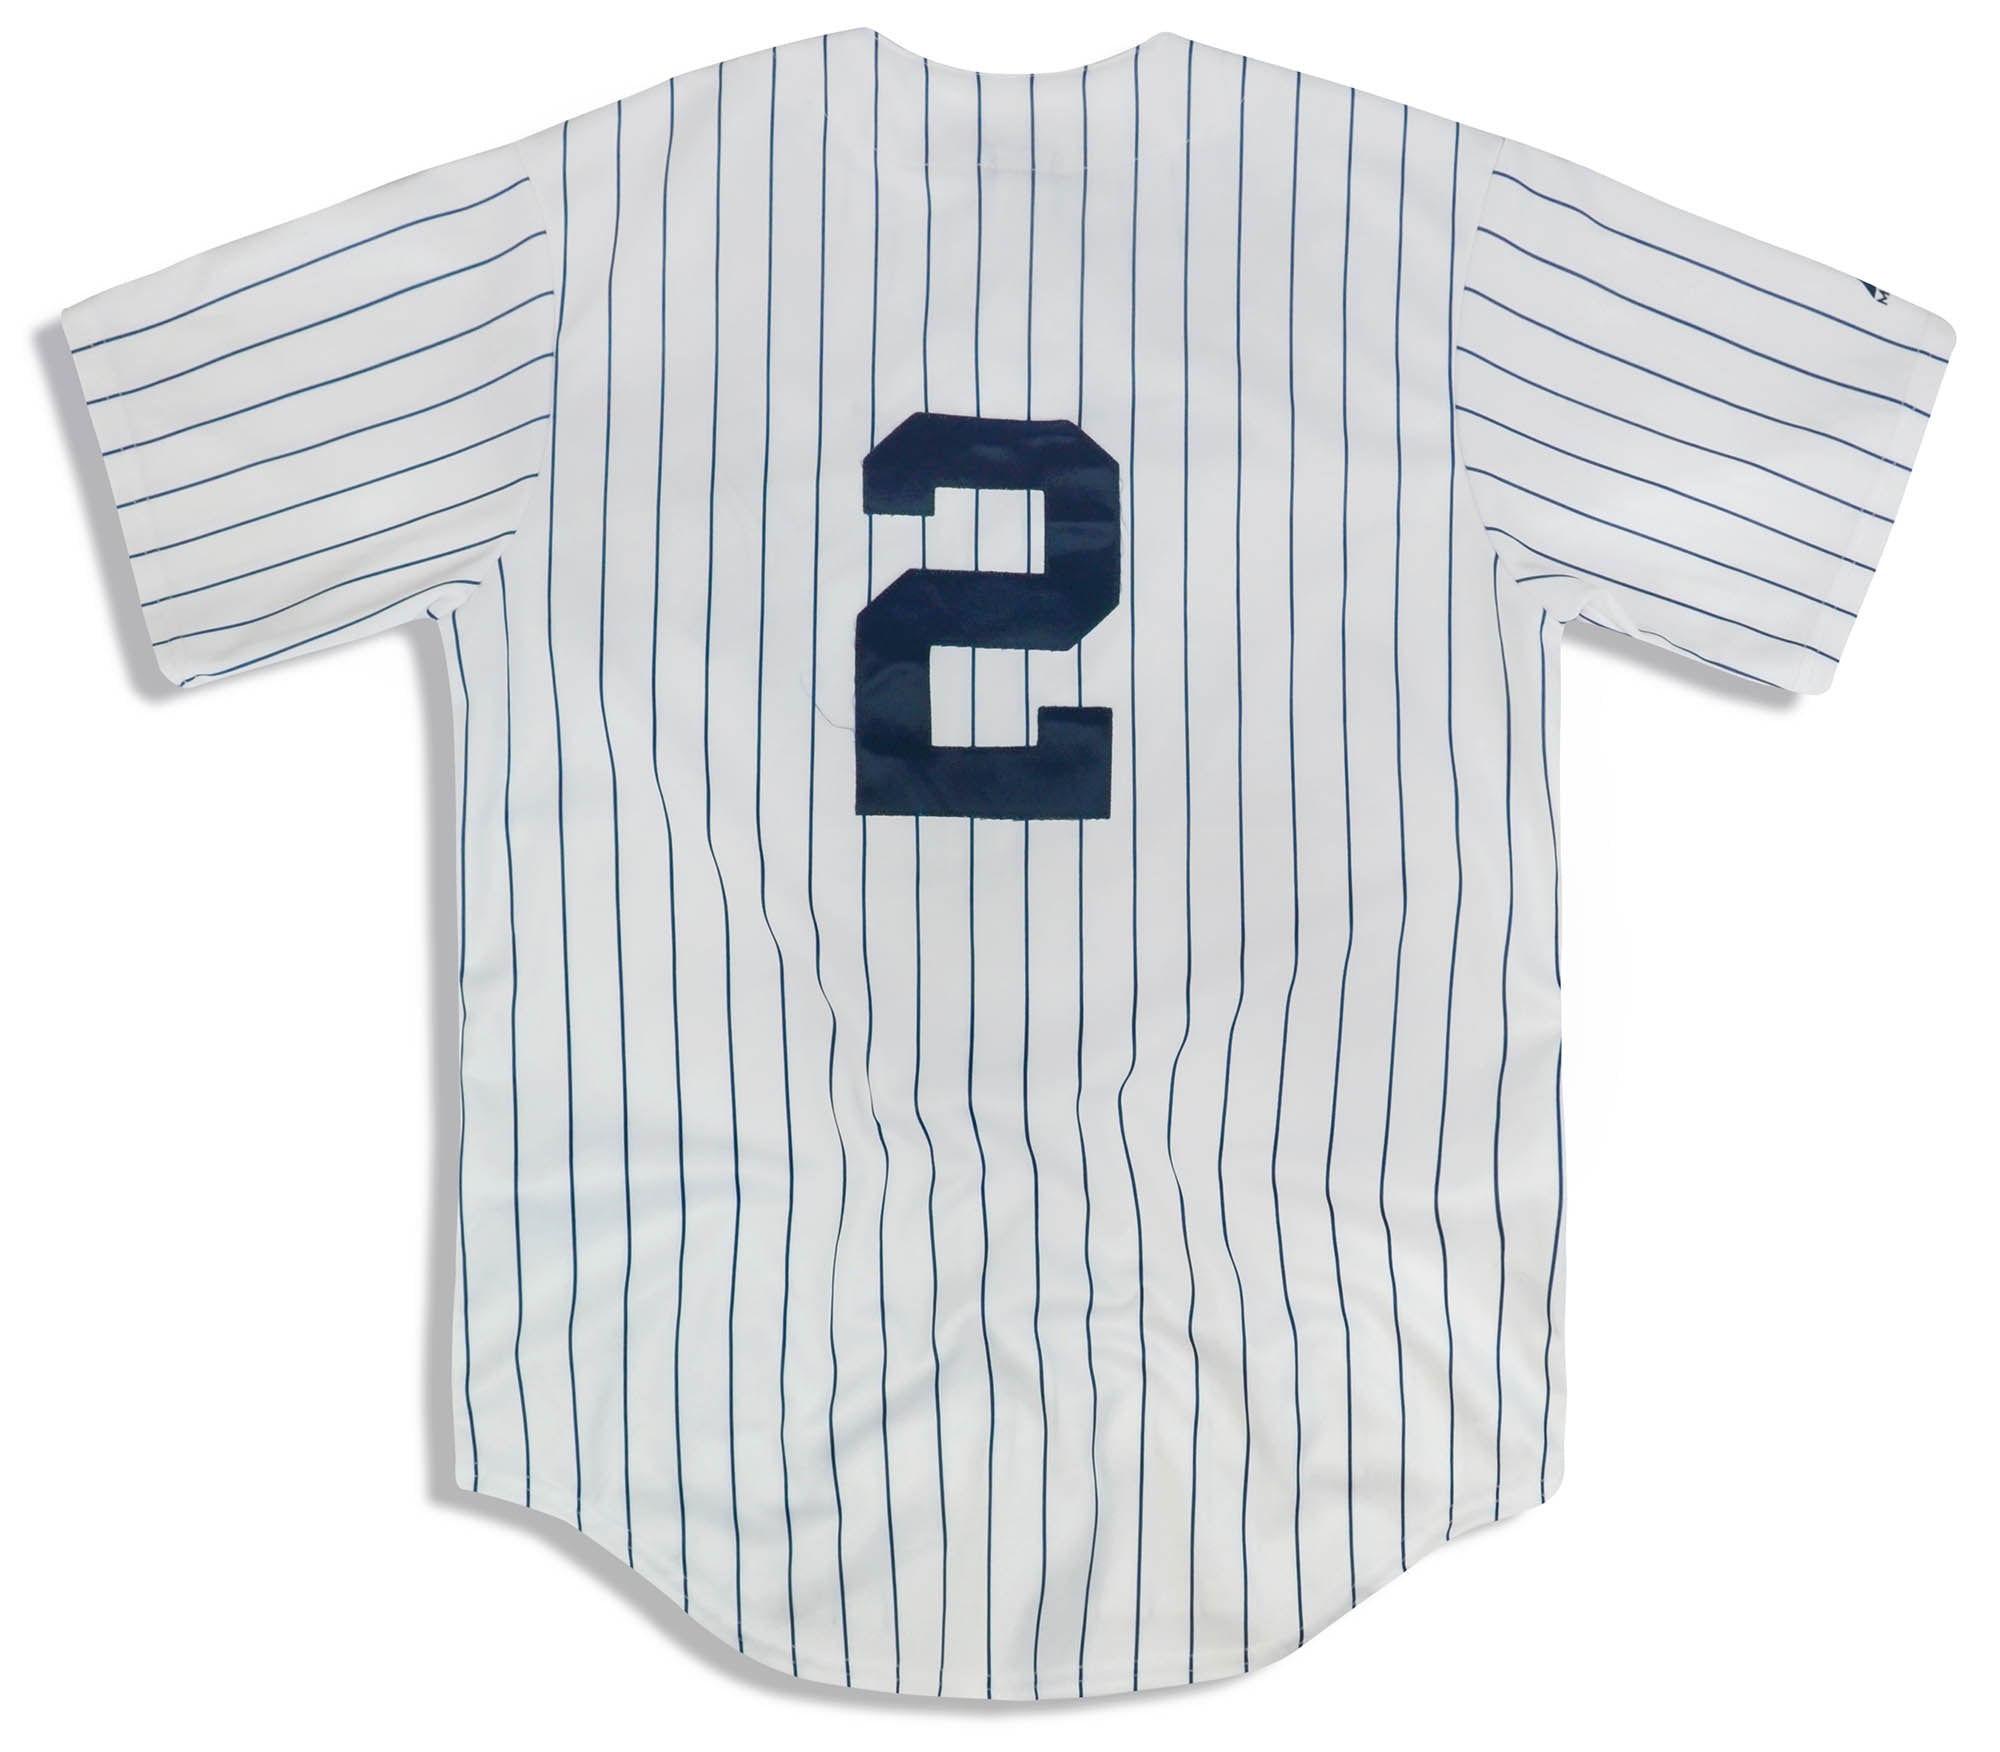 2010-14 NEW YORK YANKEES JETER #2 MAJESTIC JERSEY (HOME) M